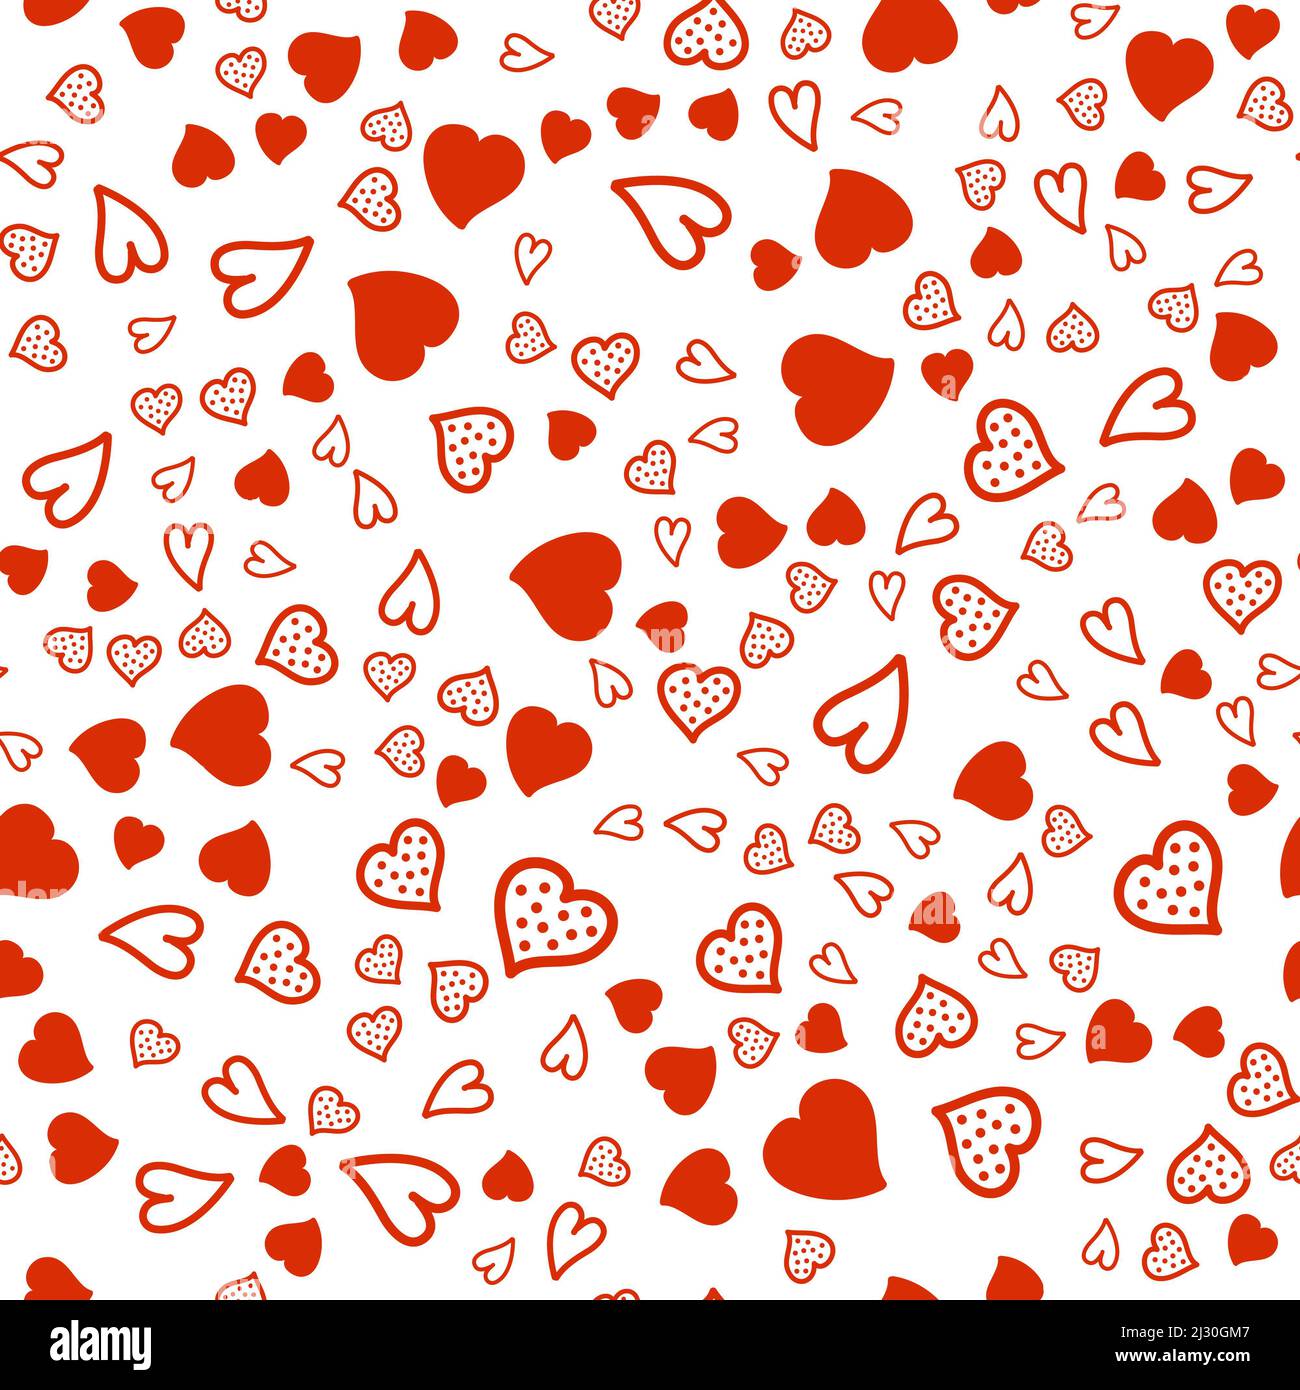 Red heart valentine wrapping paper pattern | Zazzle